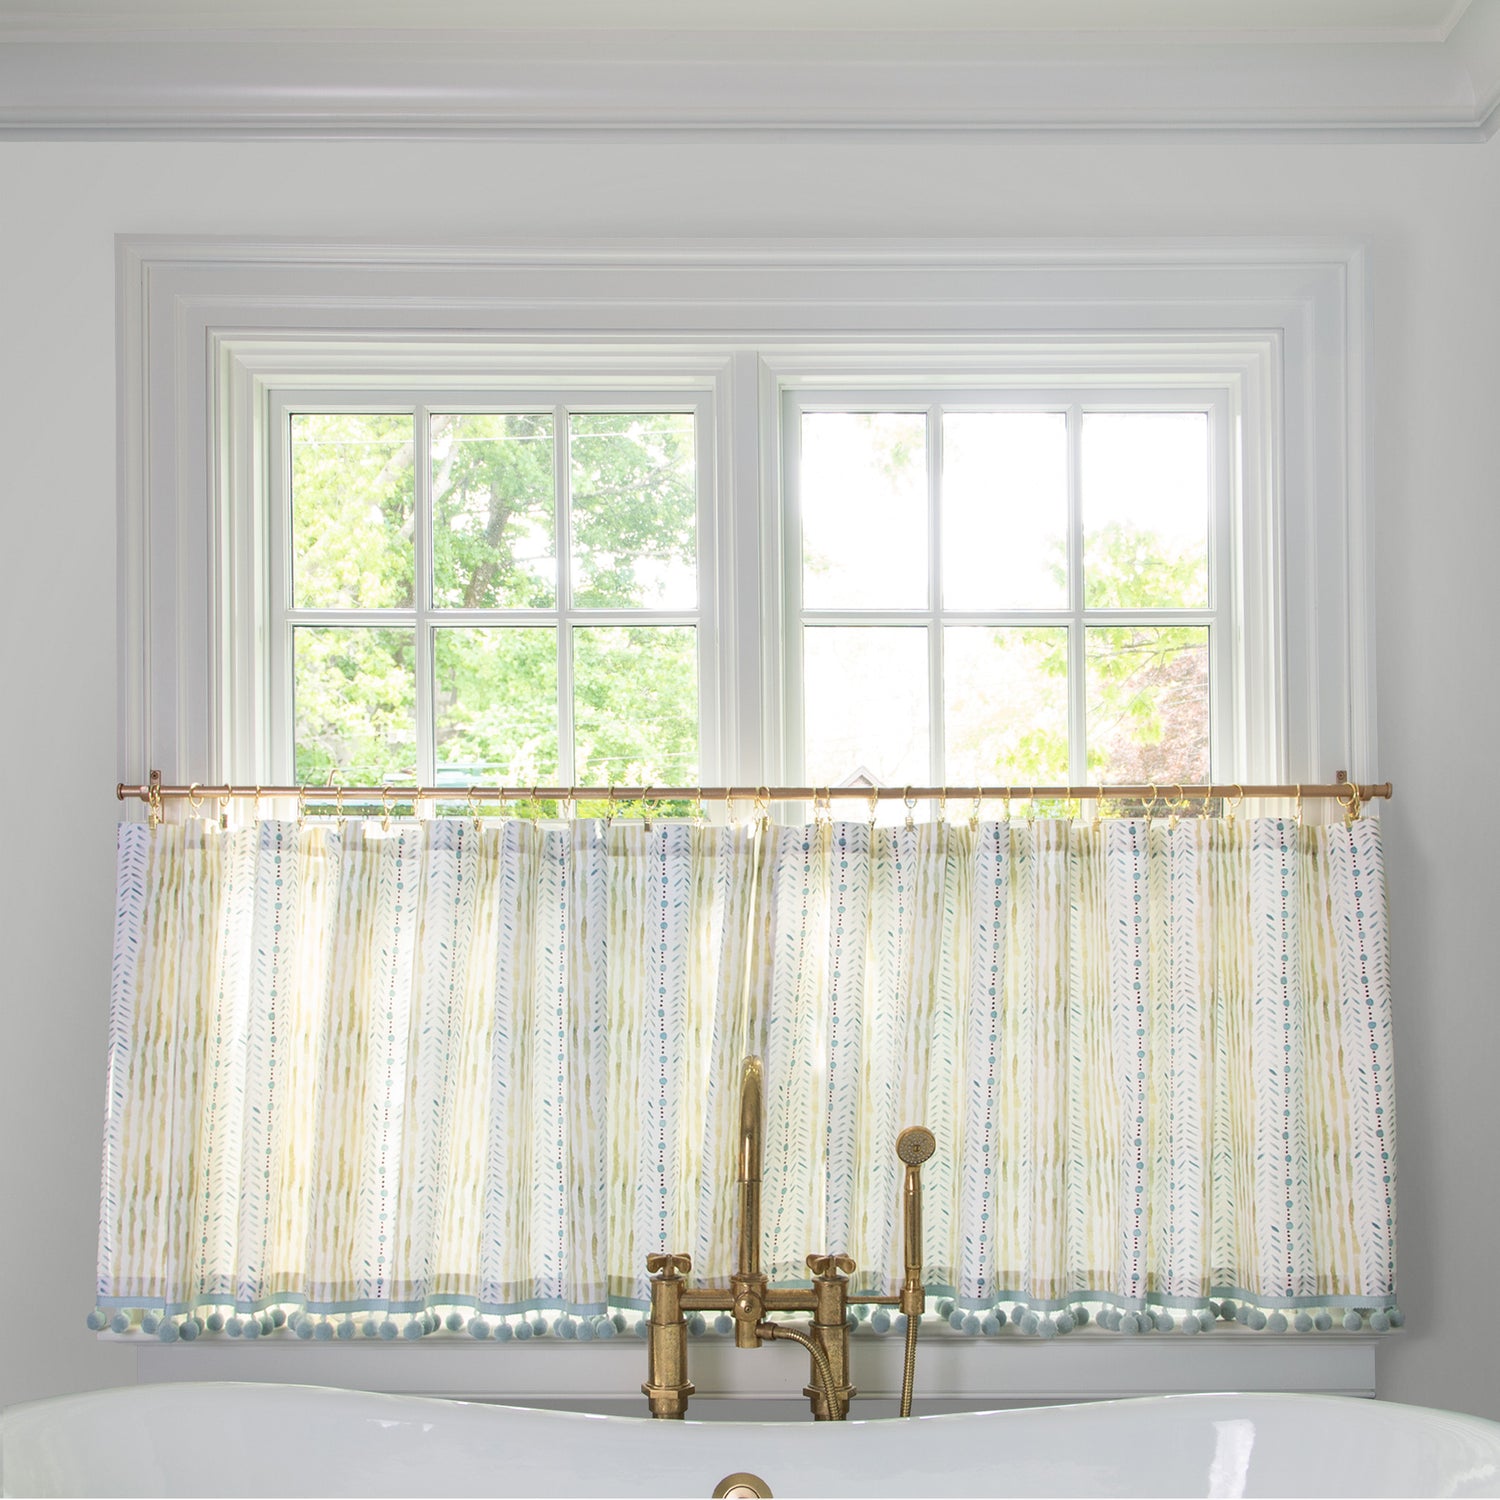 Blue & Green Striped Printed Cotton fabric curtain on a metal rod in front of an illuminated window in a bathroom